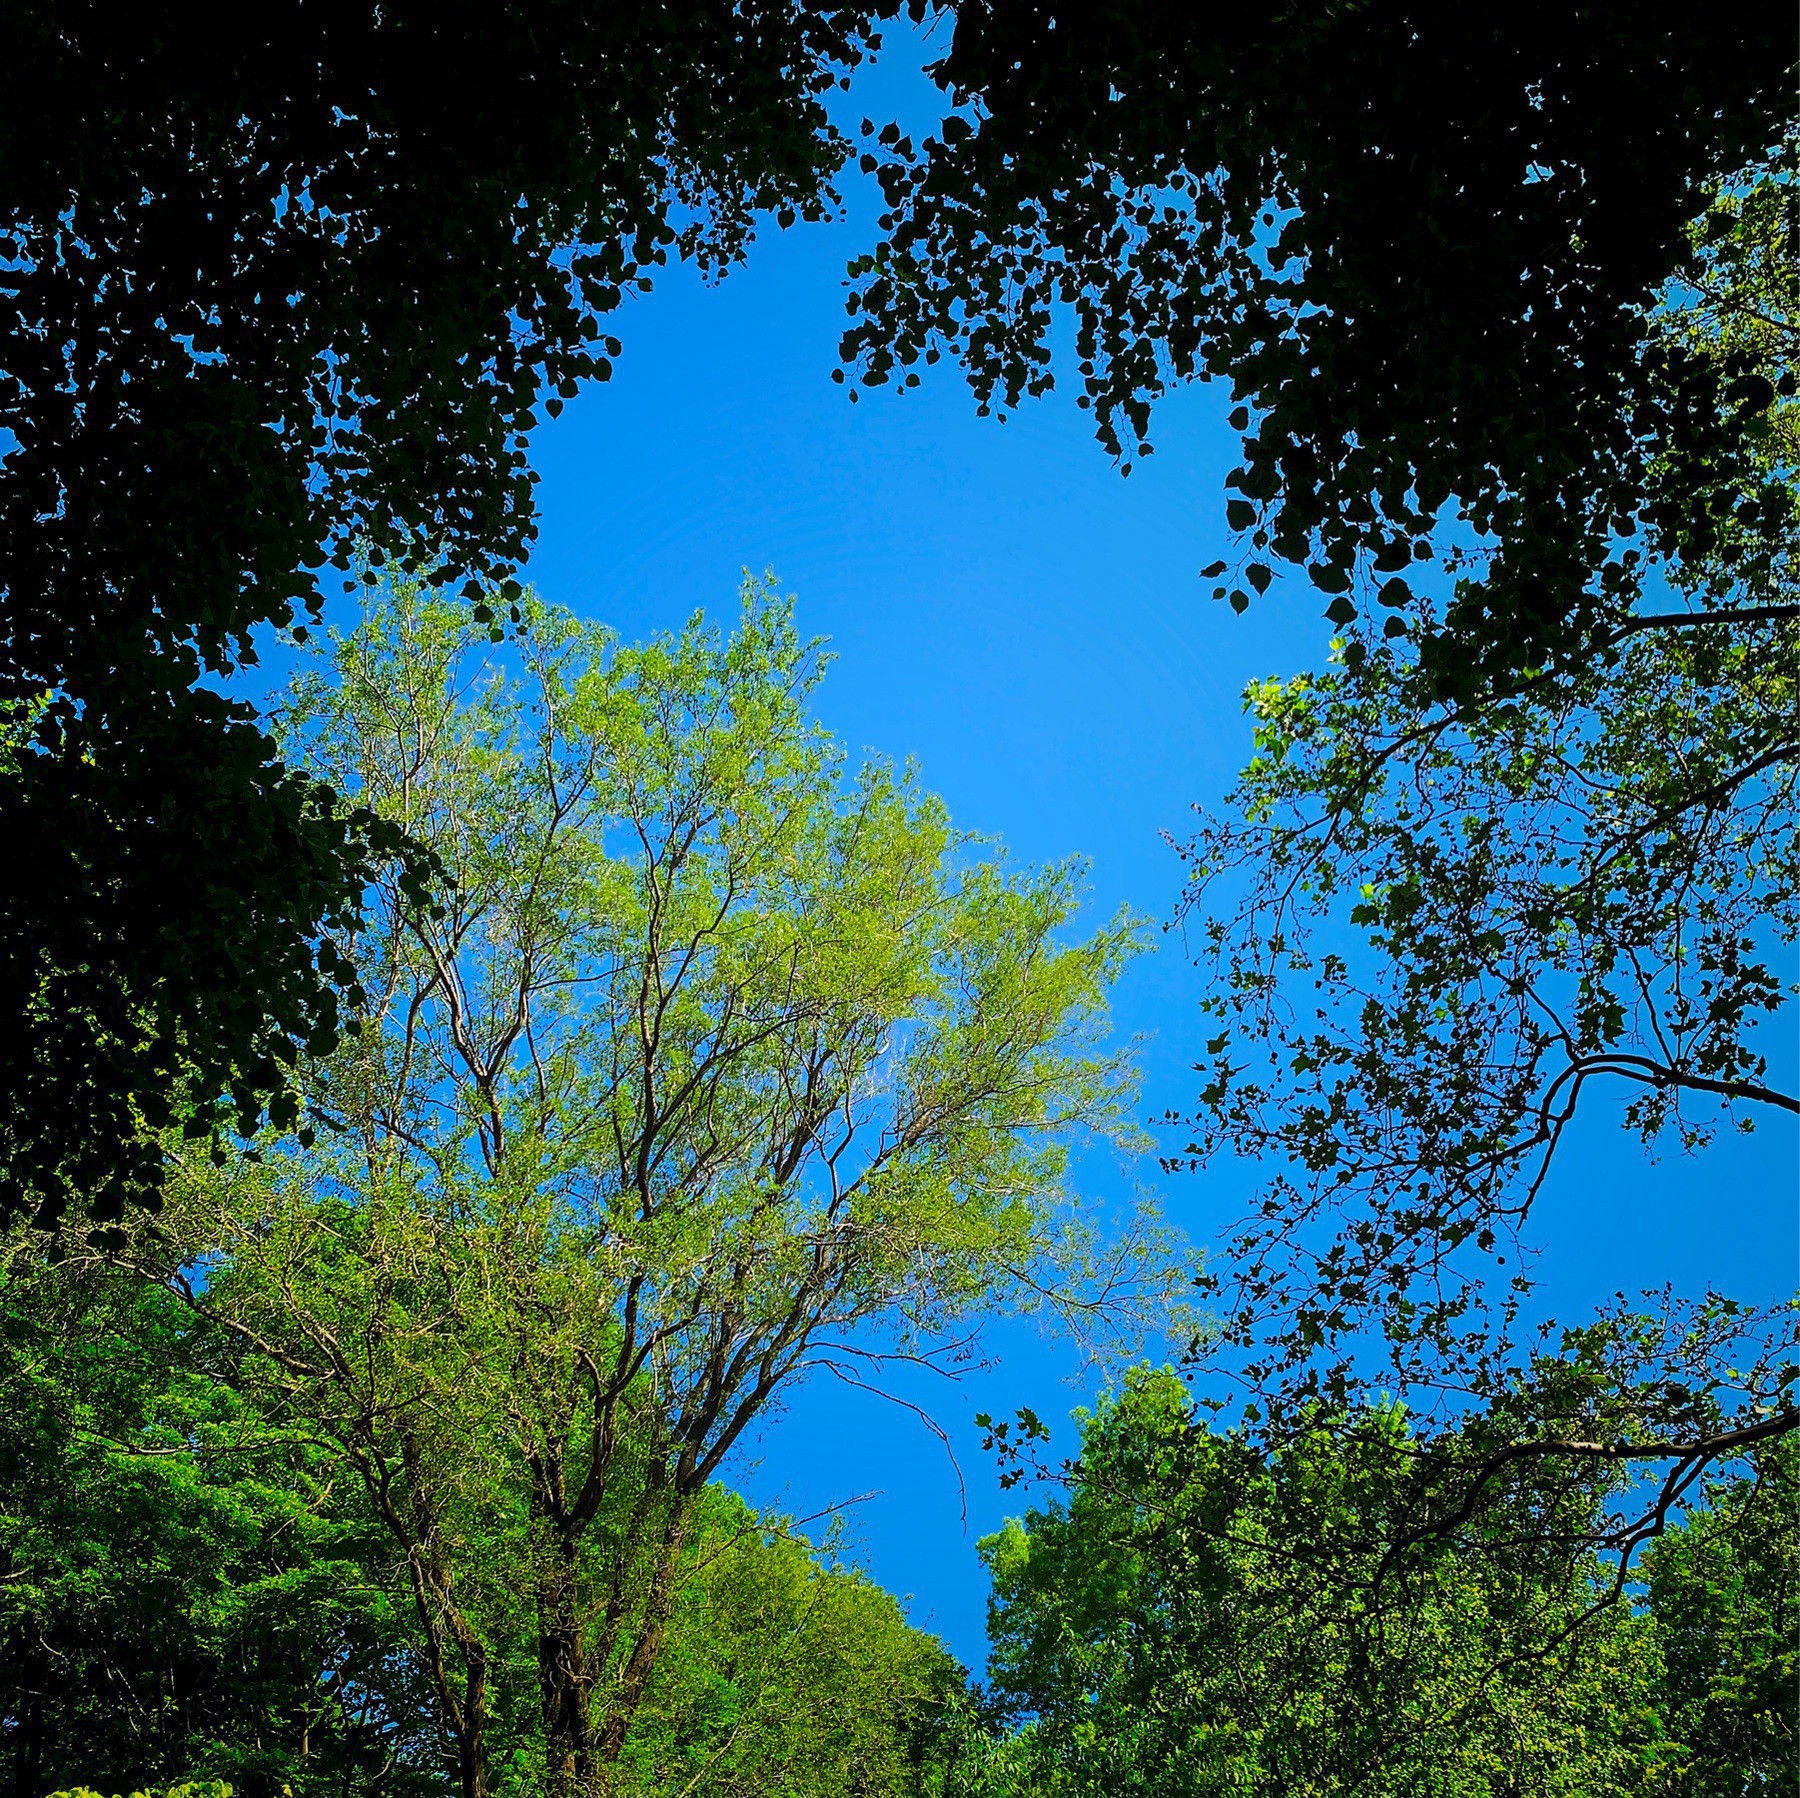 Trees and blue sky.